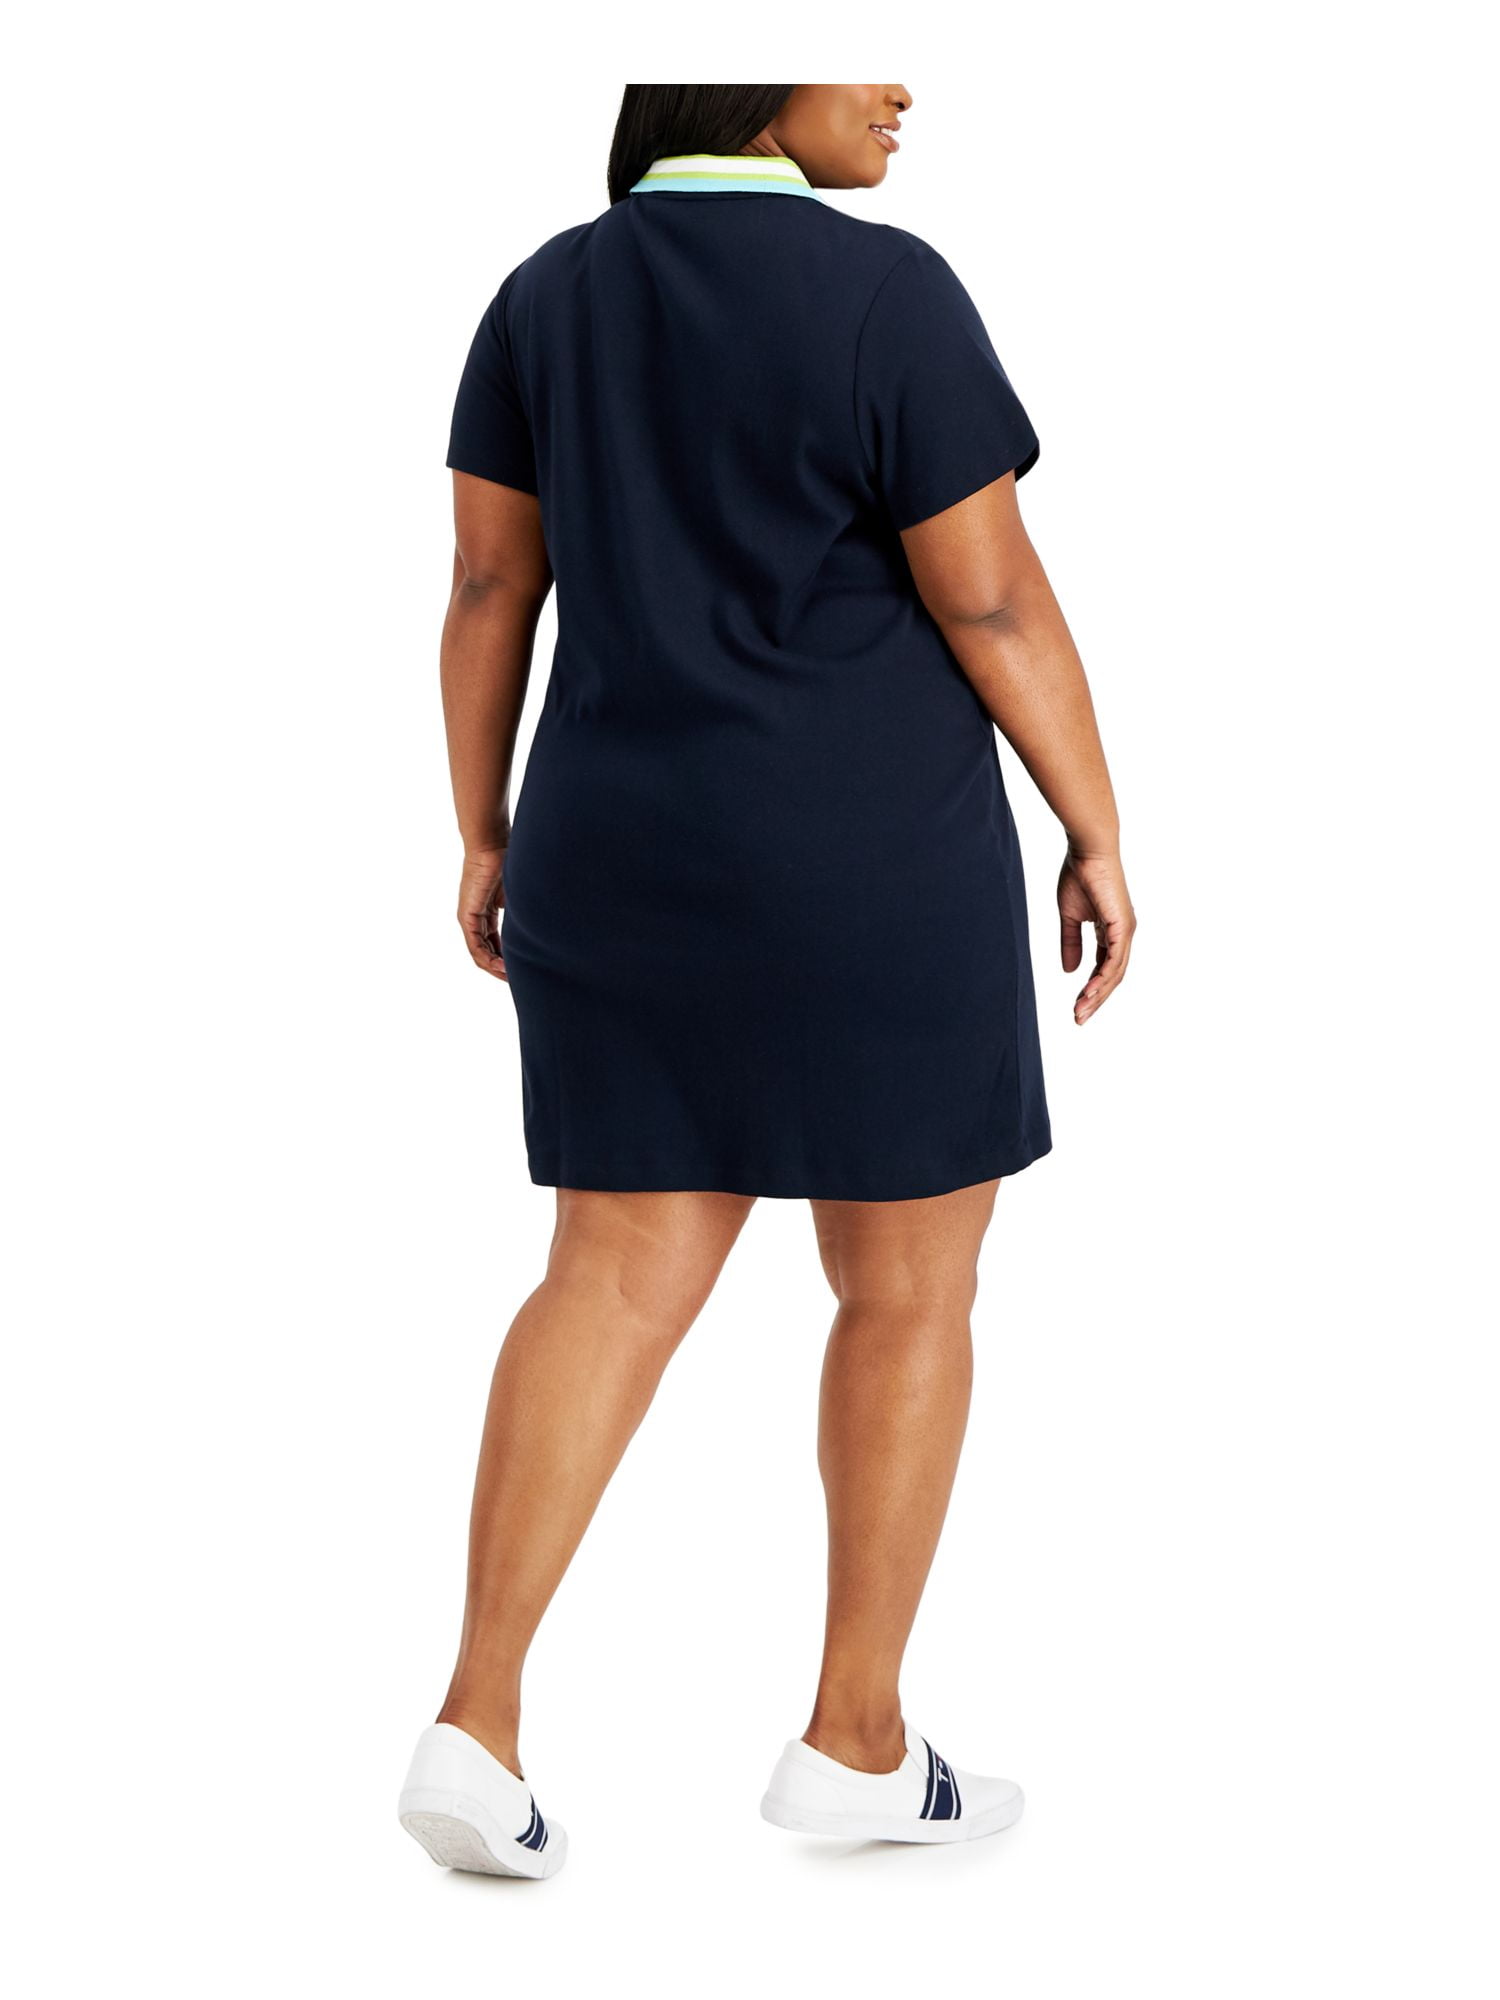 TOMMY HILFIGER Womens Navy Ribbed Logo Collared Short Polo Dress Knee Above Sleeve Unlined The Color 1X Plus Dress Embroidered Block